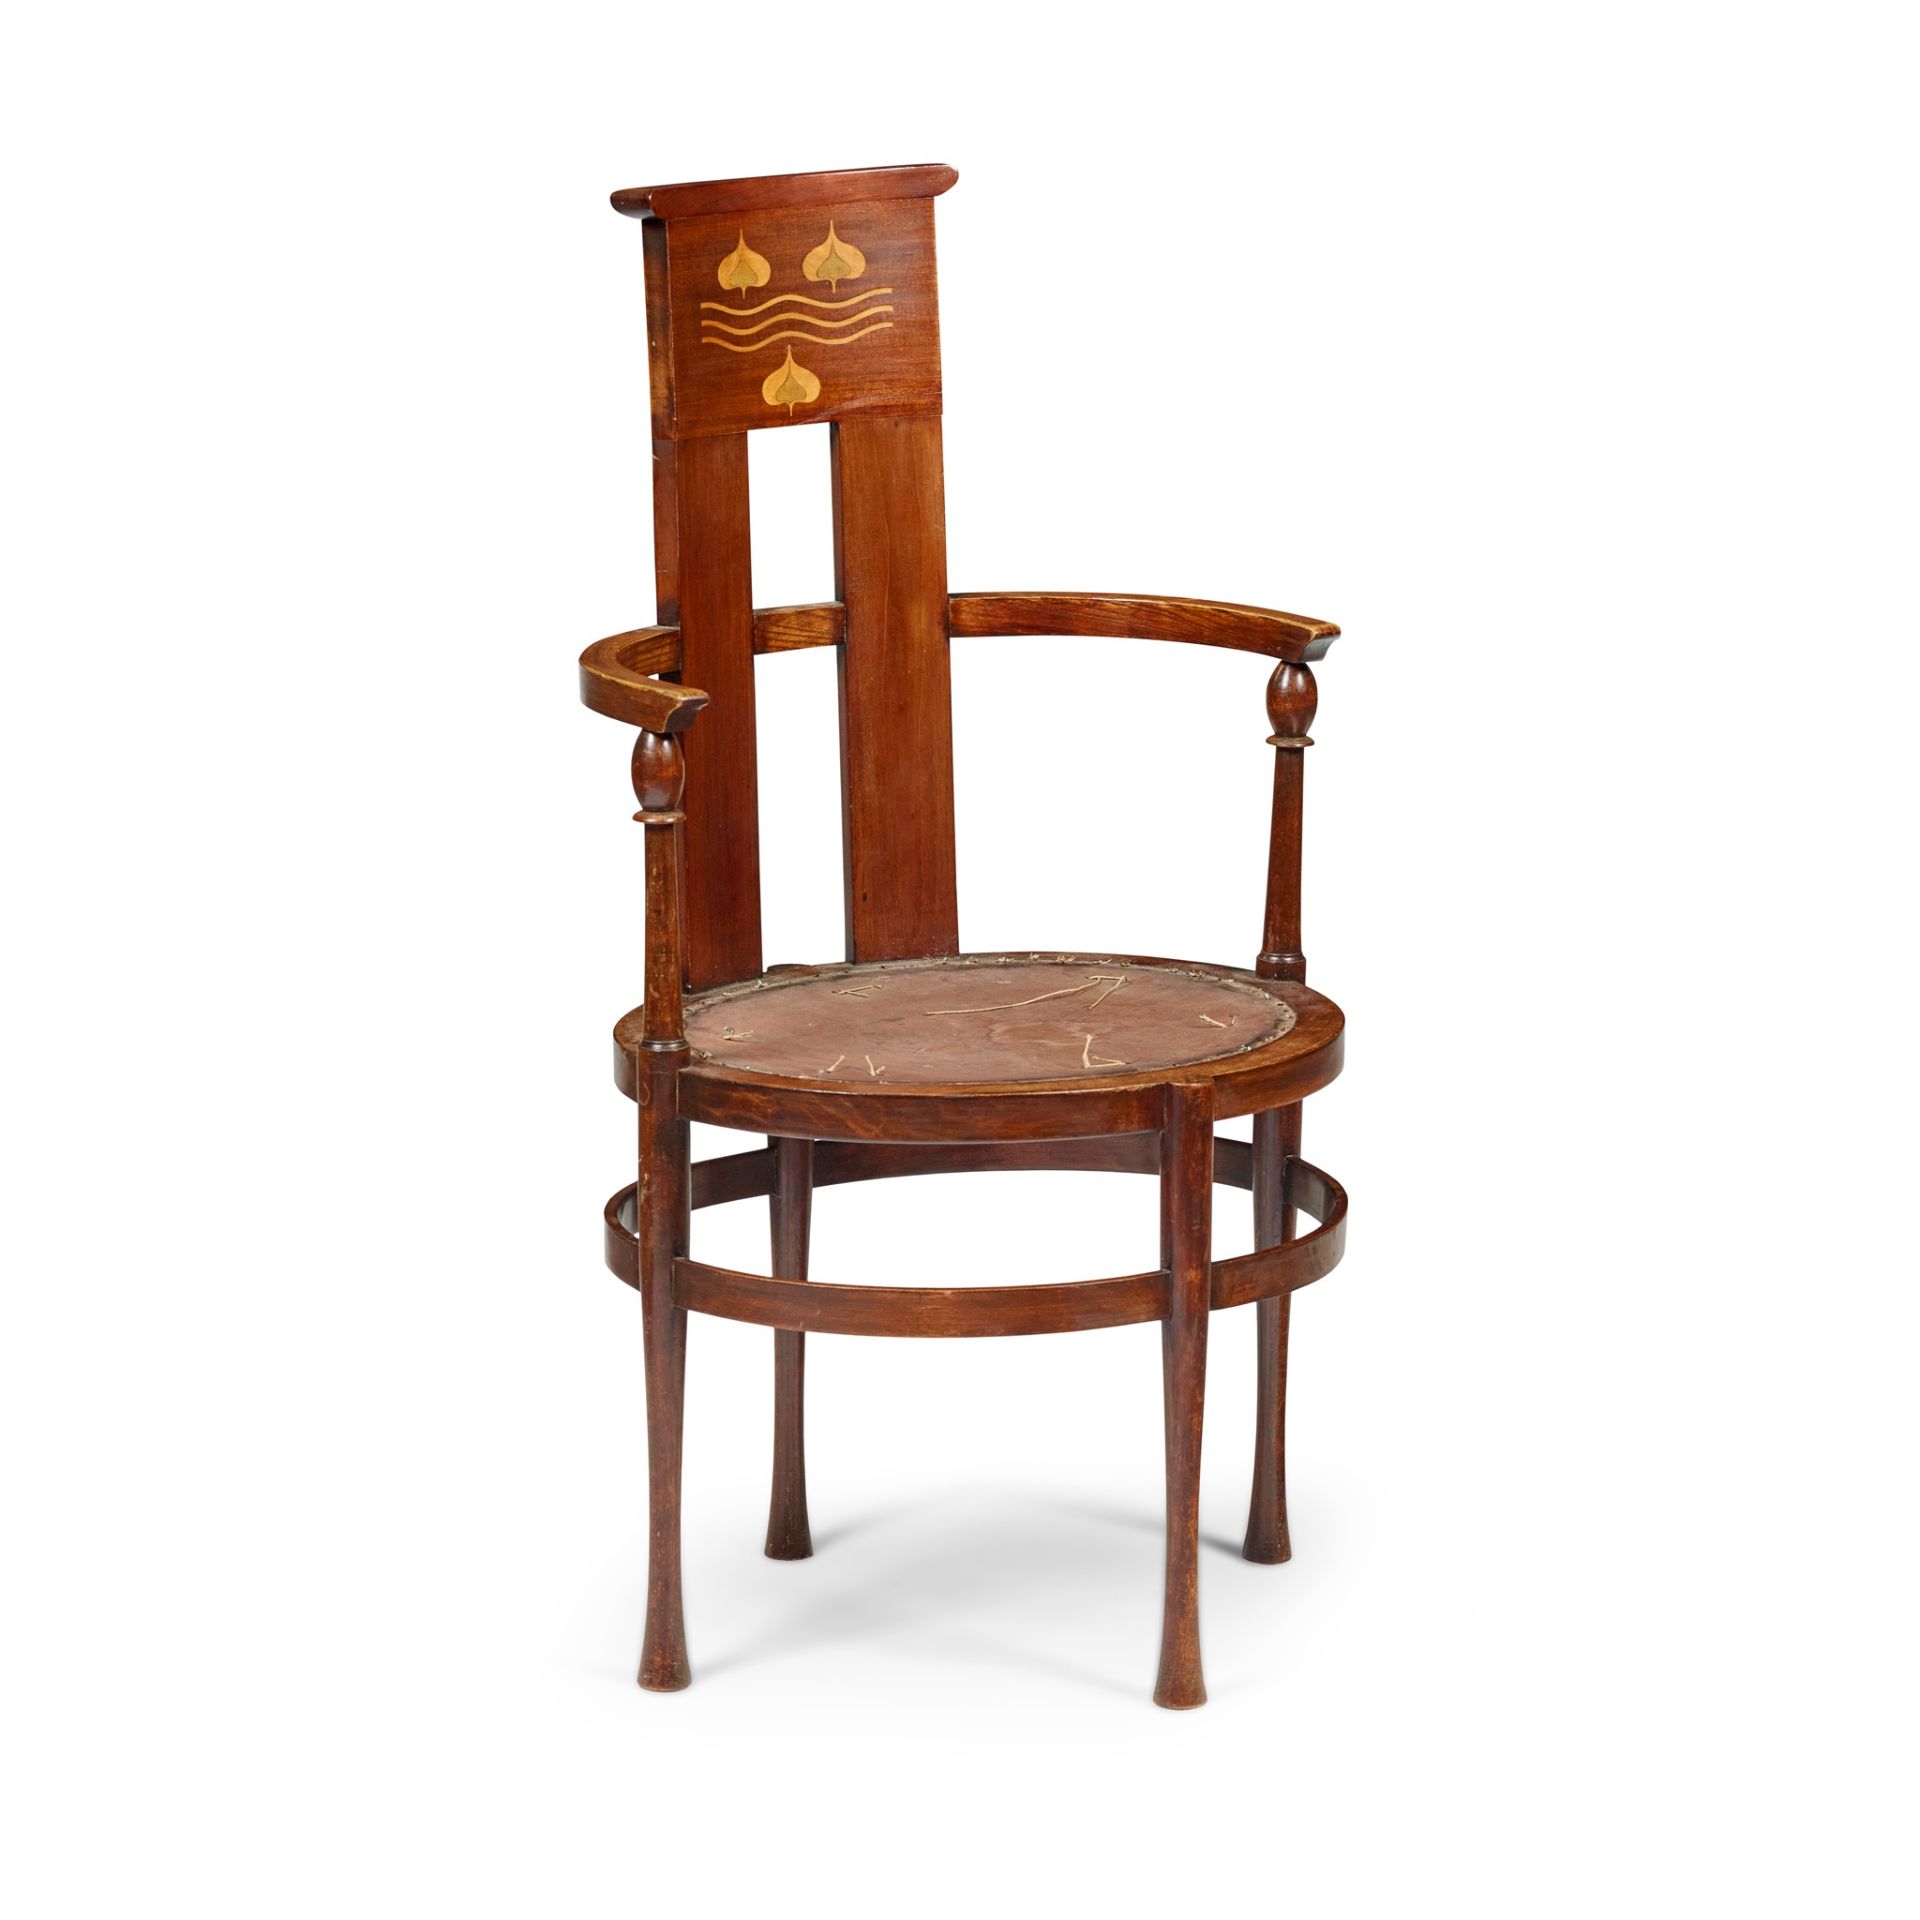 J.S. HENRY, LONDON (ATTRIBUTED MAKERS) ARMCHAIR, CIRCA 1900